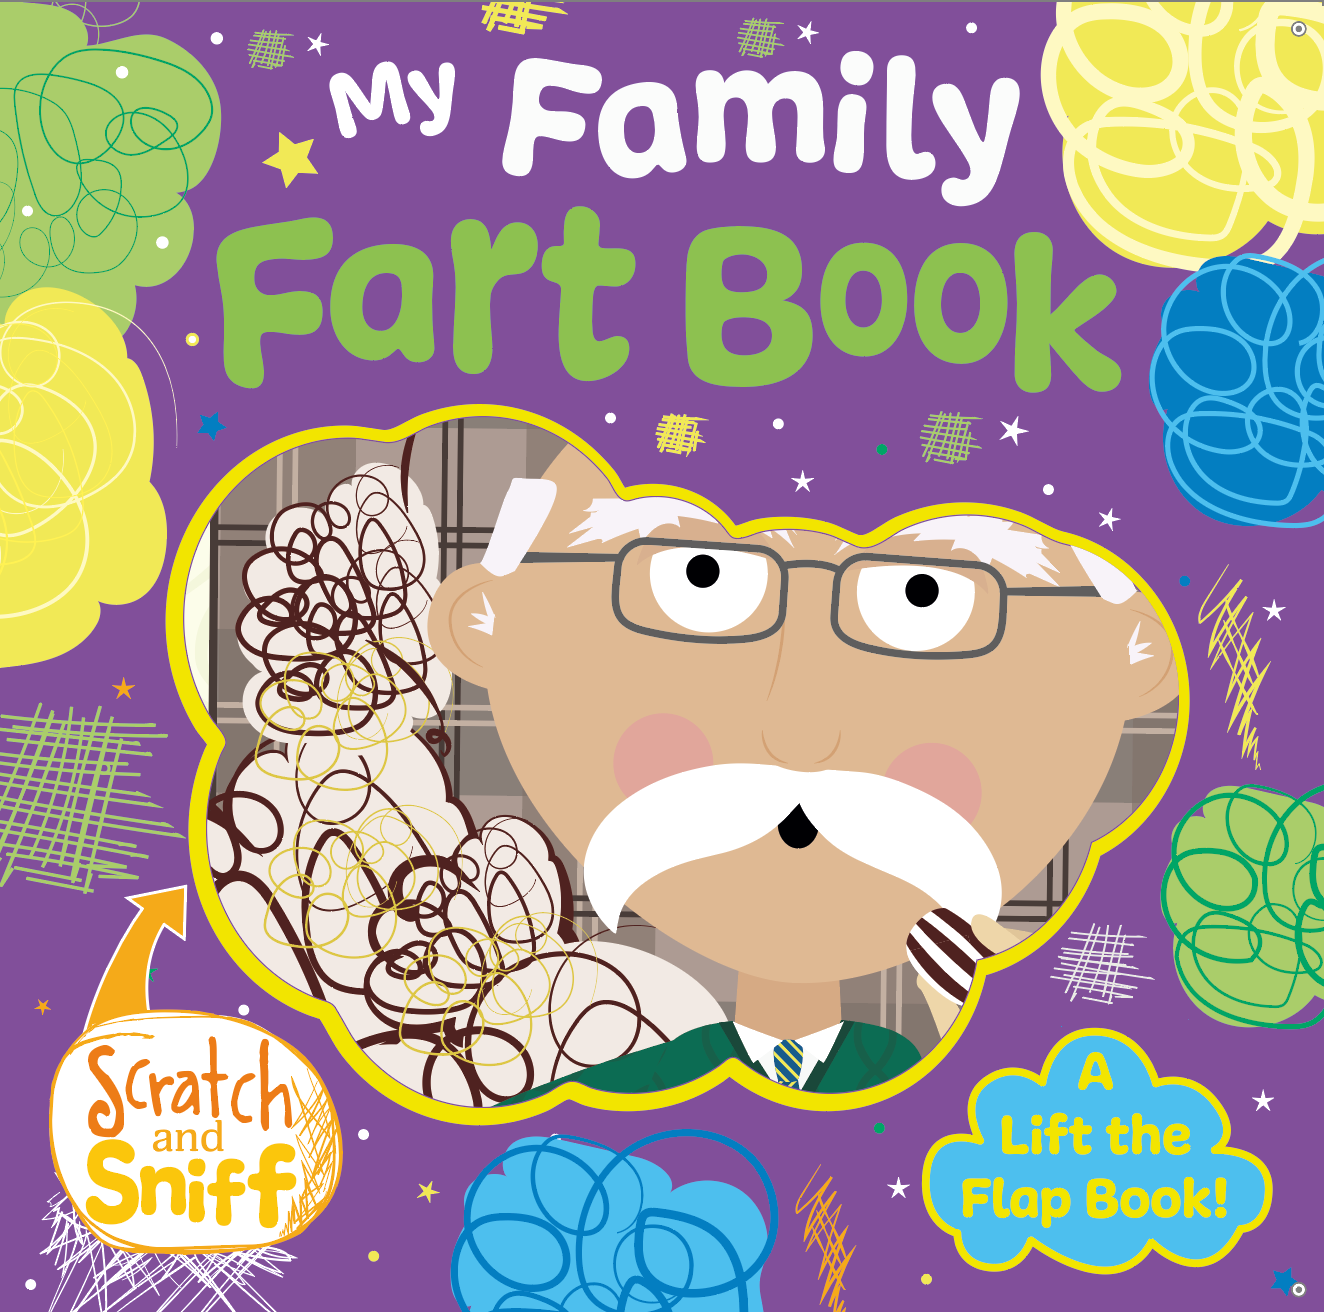 Family Scratch and Sniff Book